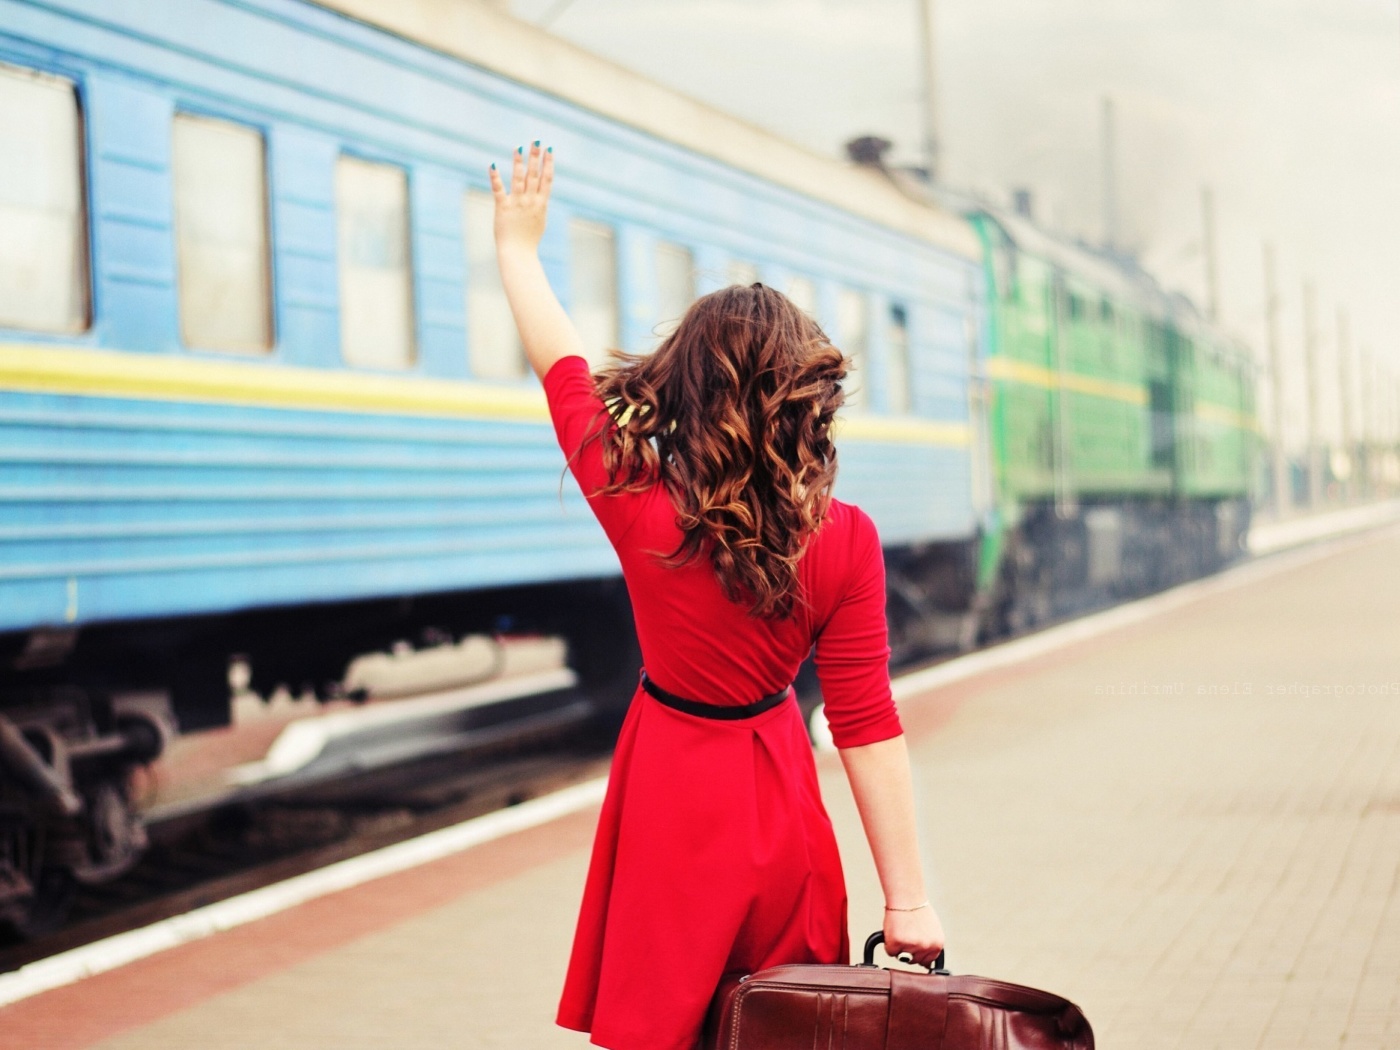 Girl traveling from train station wallpaper 1400x1050